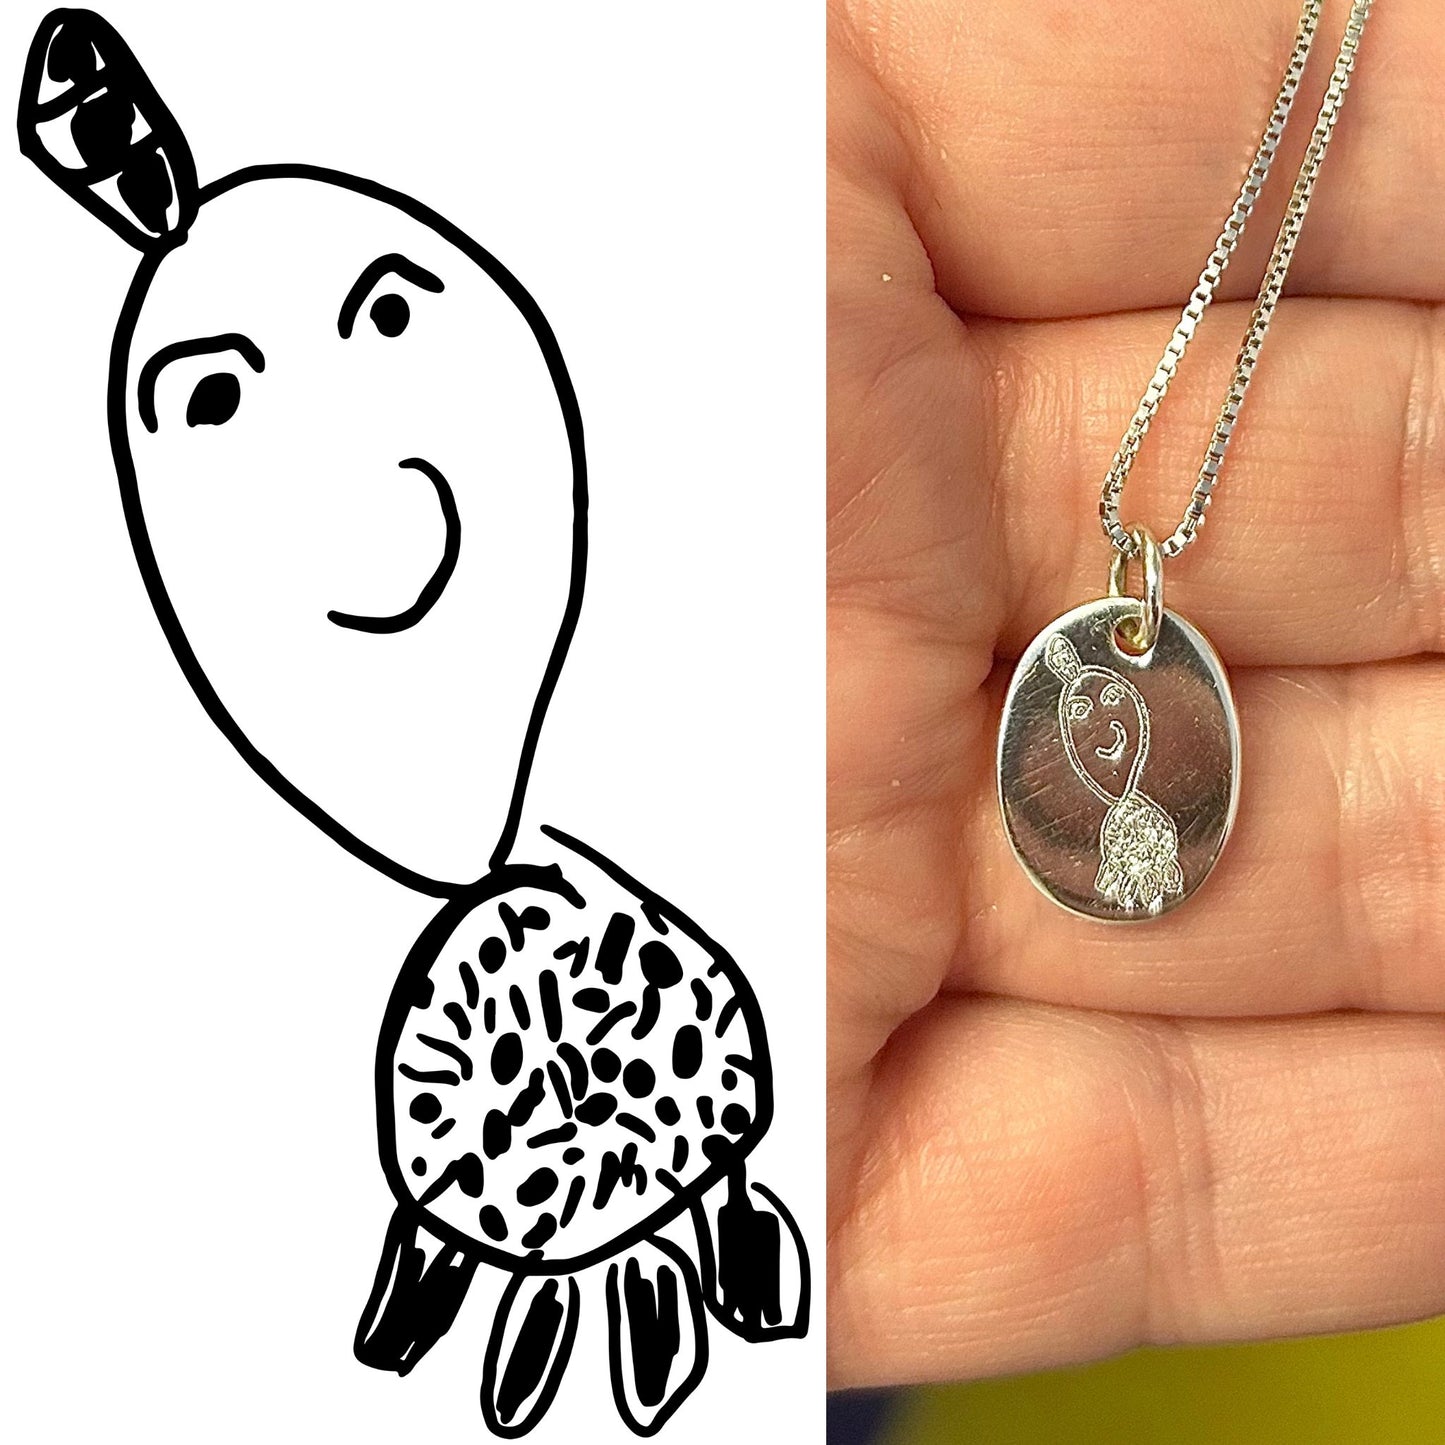 Child's Drawing Engraved Pendant - The Little Jewellery Company